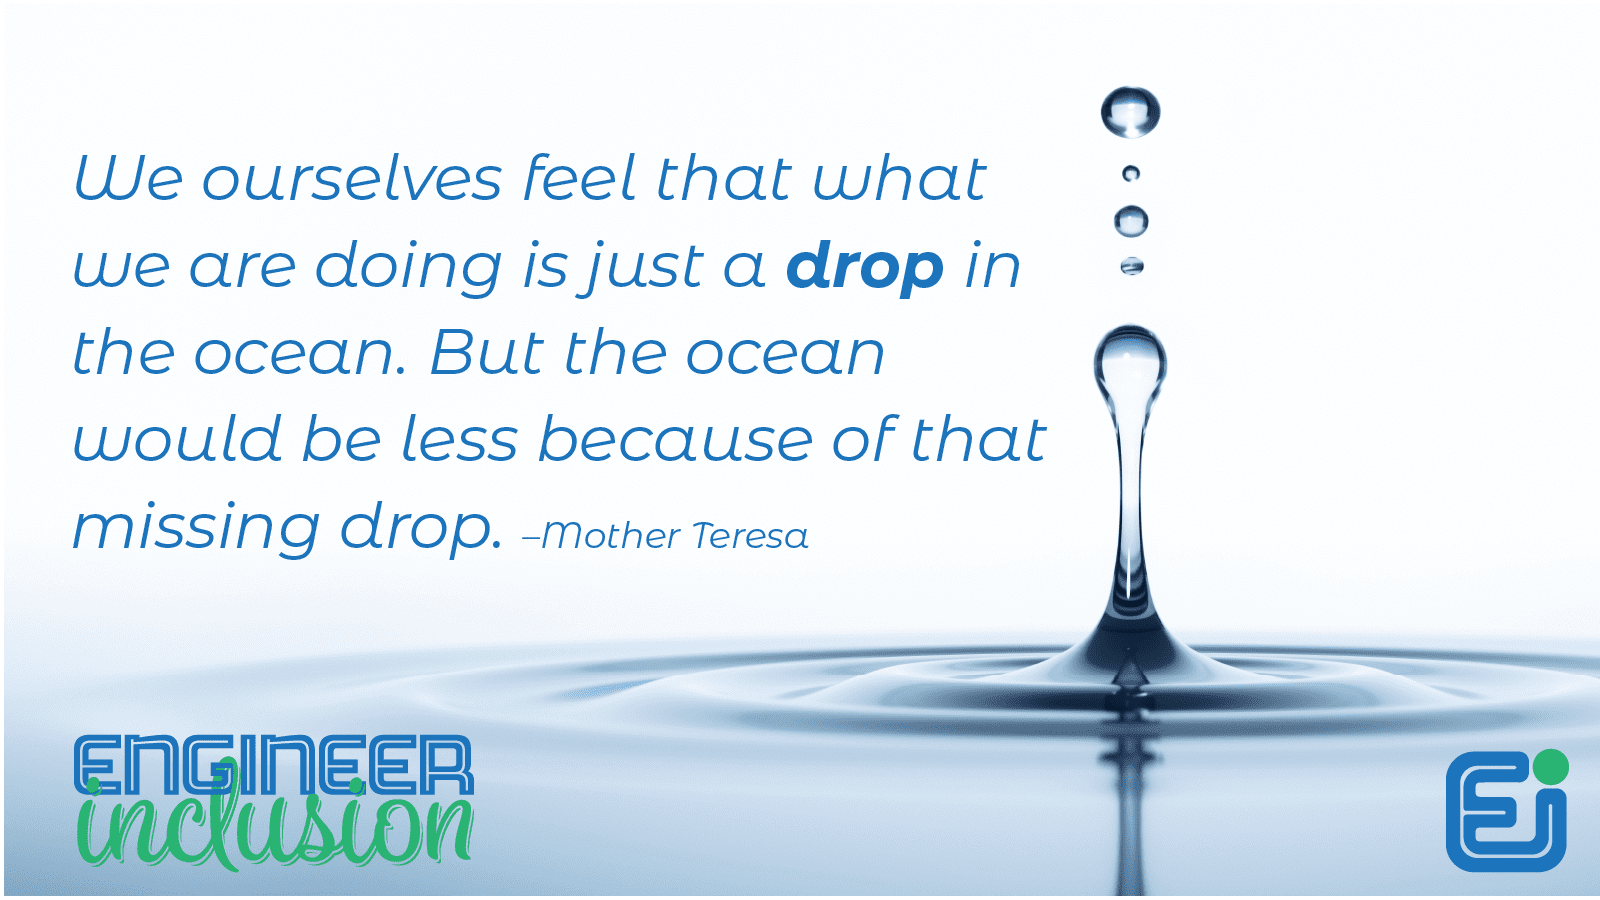 We ourselves feel that what we are doing is just a drop in the ocean. But the ocean would be less because of that missing drop. –Mother Teresa